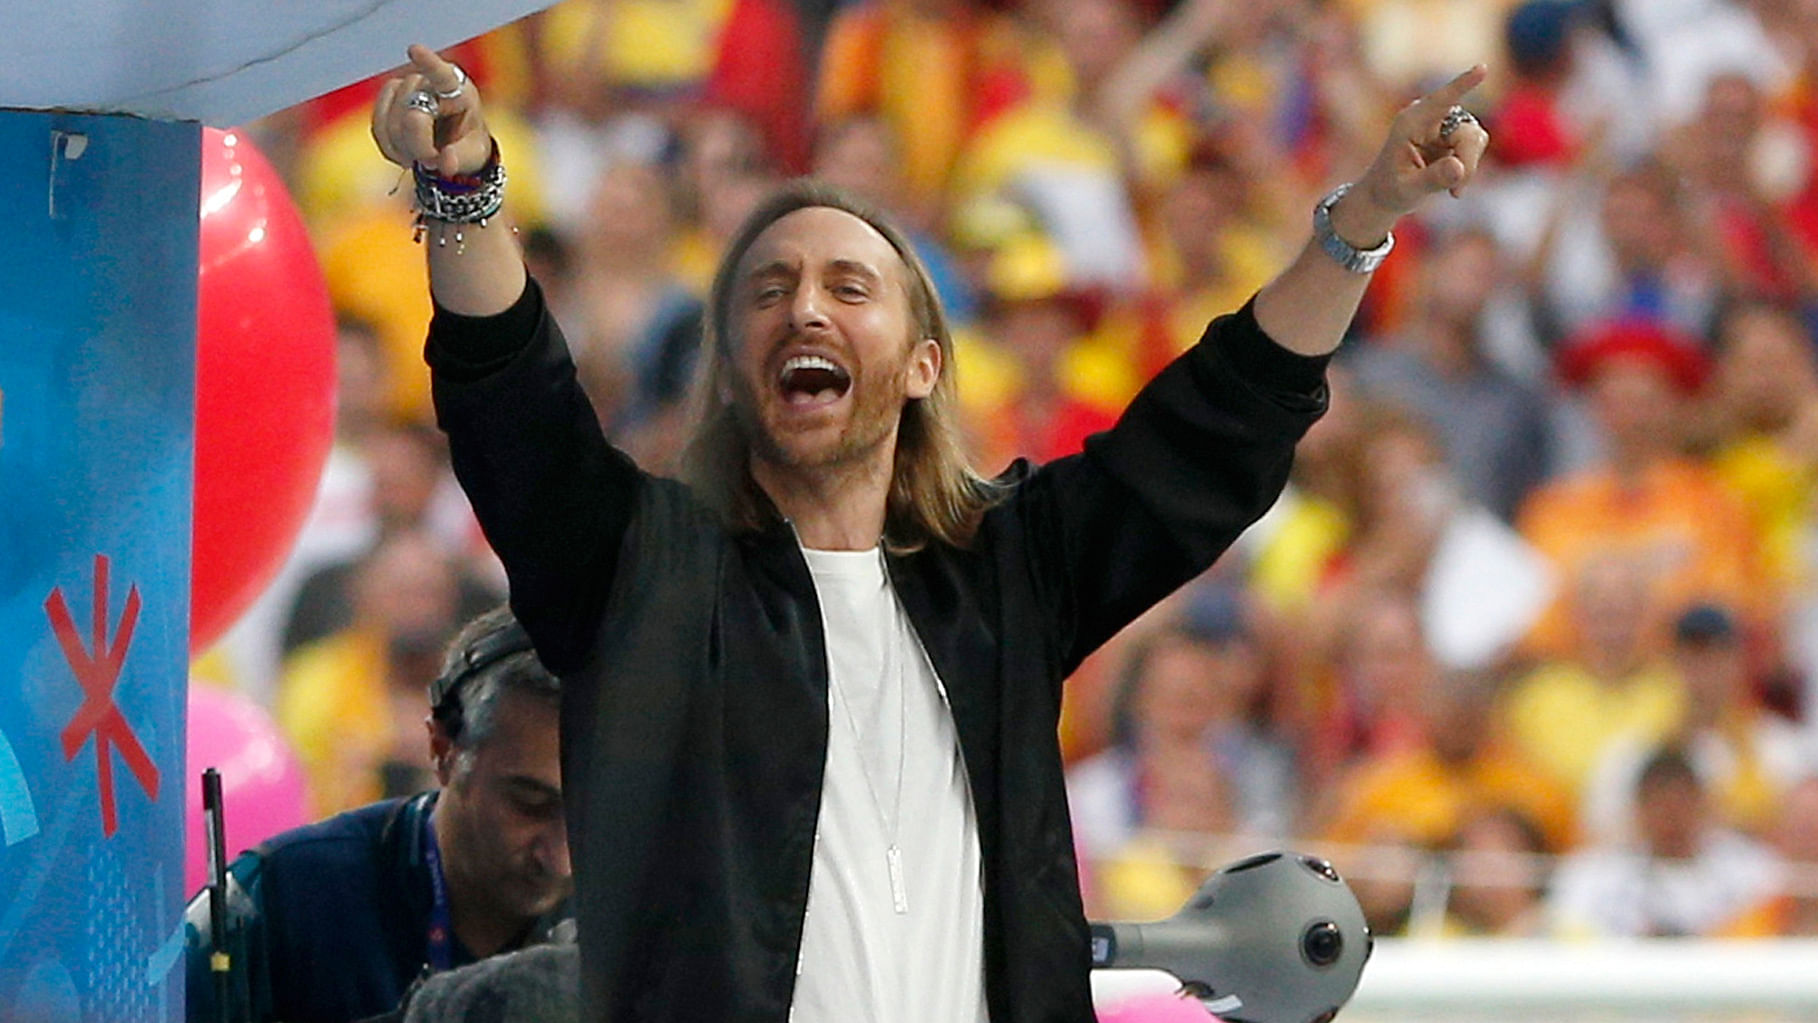 David Guetta is on a four-city tour in the country. (Photo: AP)